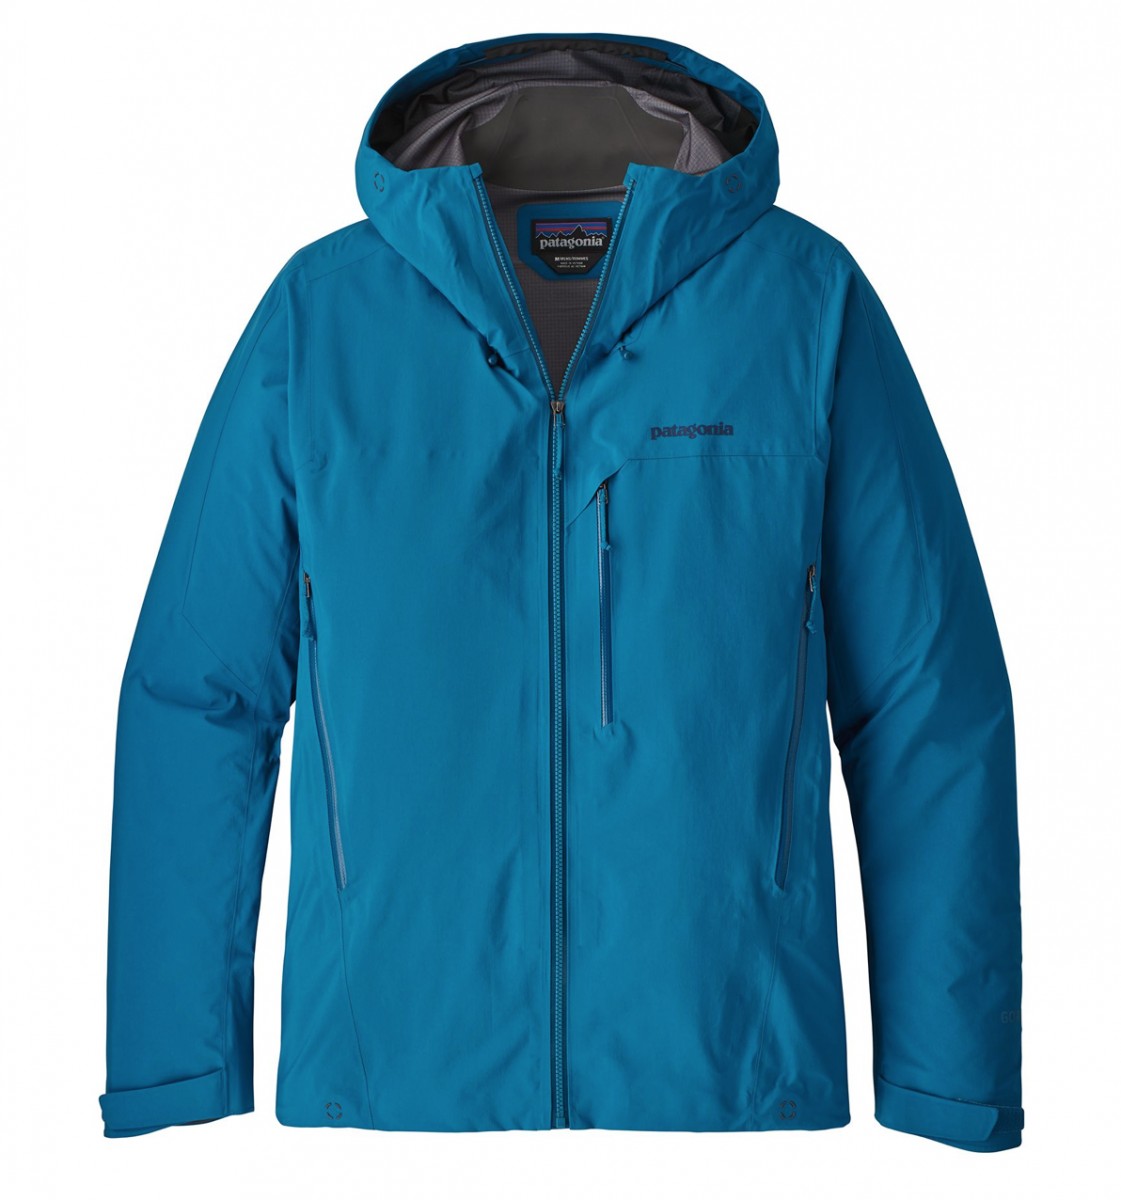 Patagonia Pluma Review | Tested & Rated